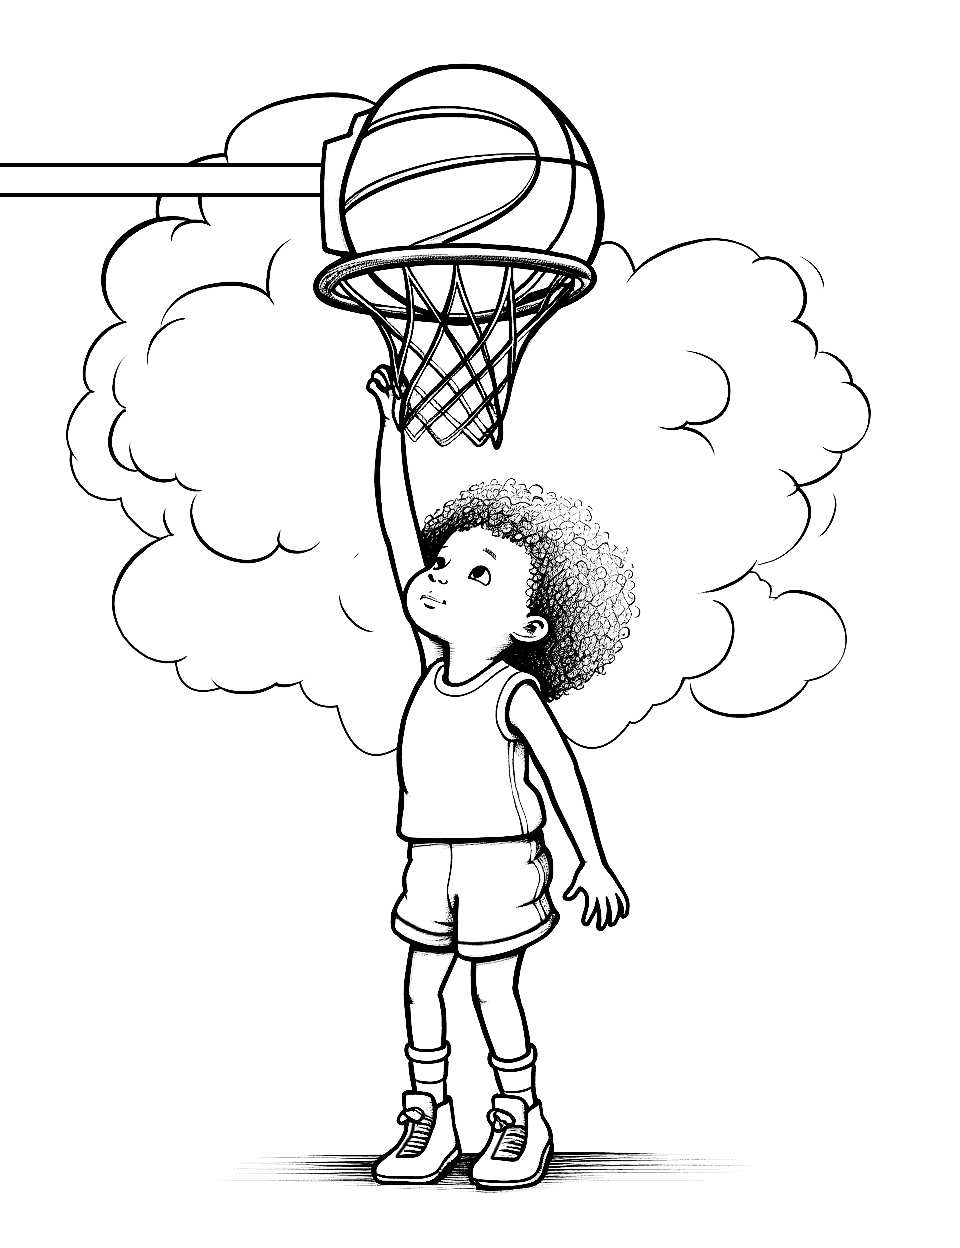 Basketball coloring pages free printable sheets